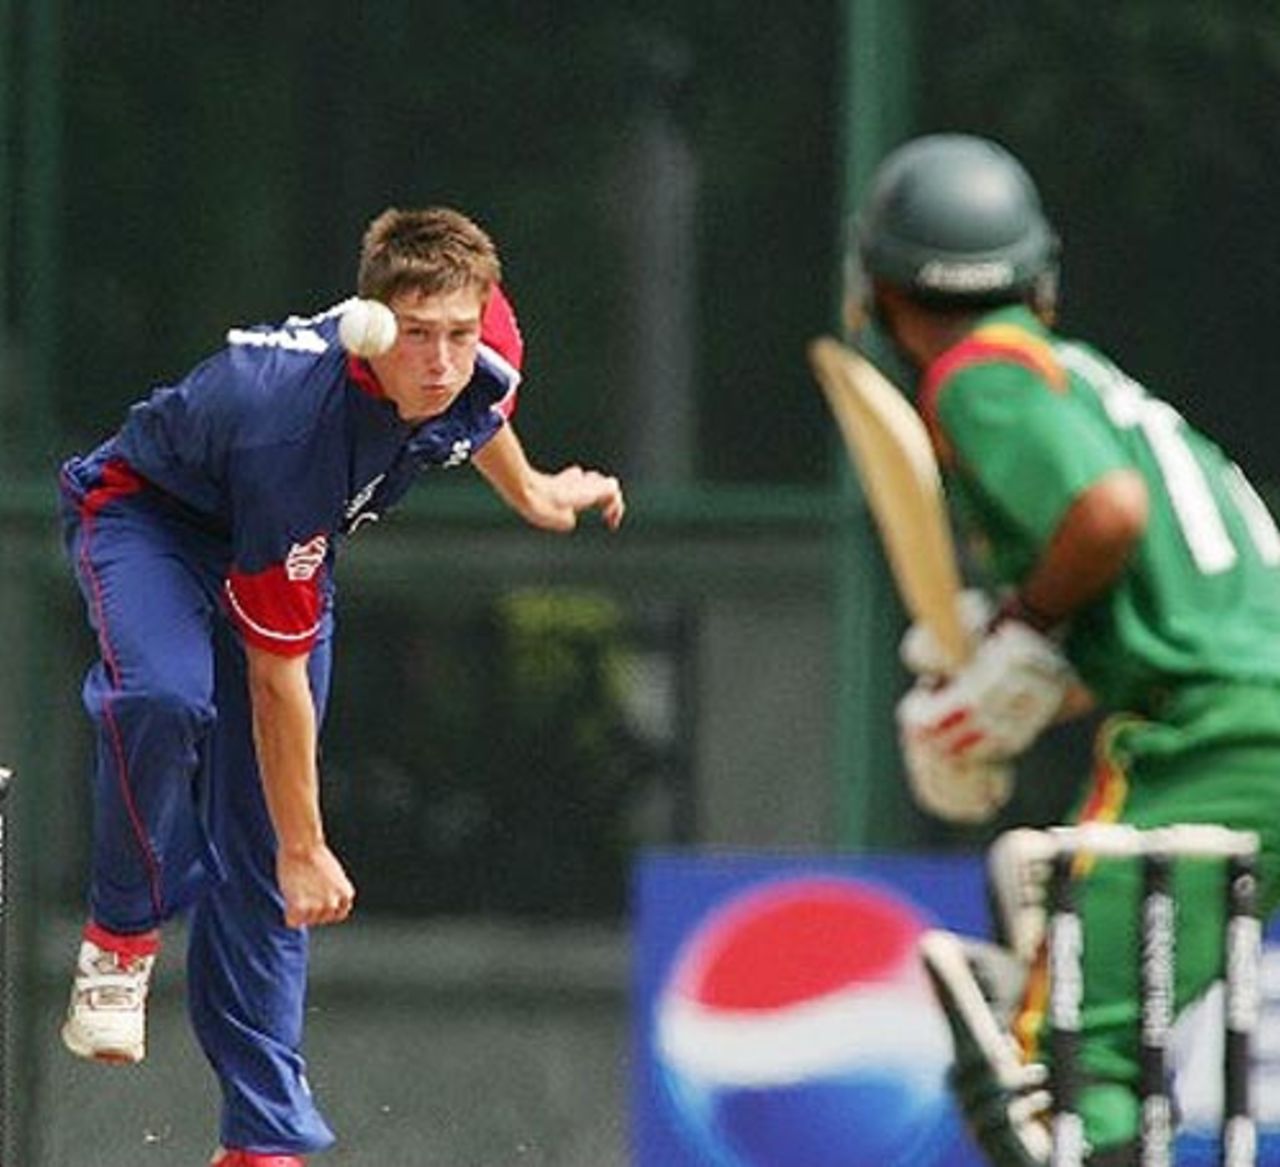 Chris Woakes claimed a solitary wicket with his seamers, Bangladesh Under-19s v England Under-19s, Under-19 World Cup, Kuala Lumpur, February 22, 2008 
